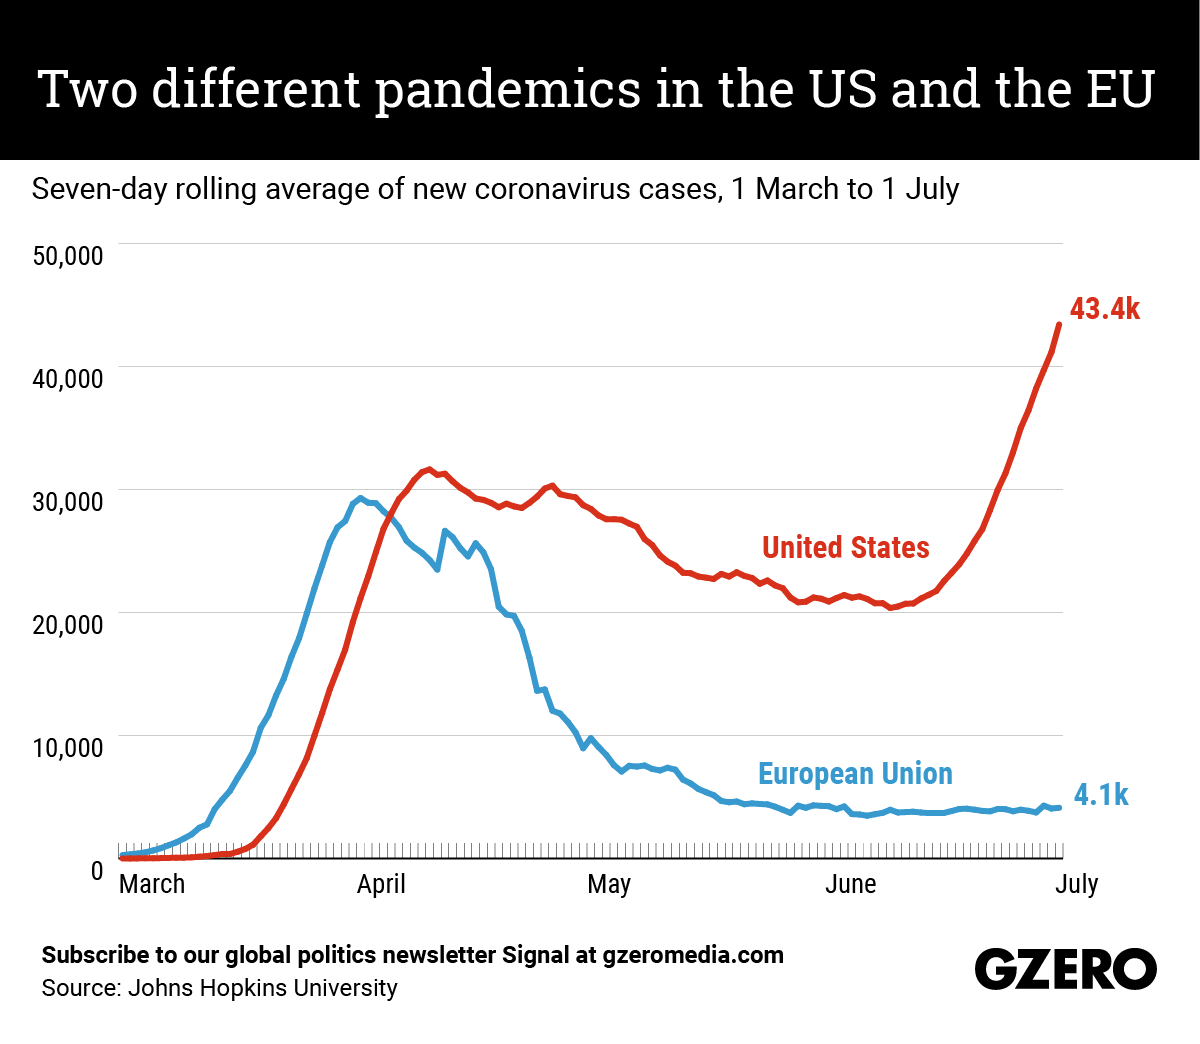 The Graphic Truth: The US pandemic is totally different (and much worse) than the EU's